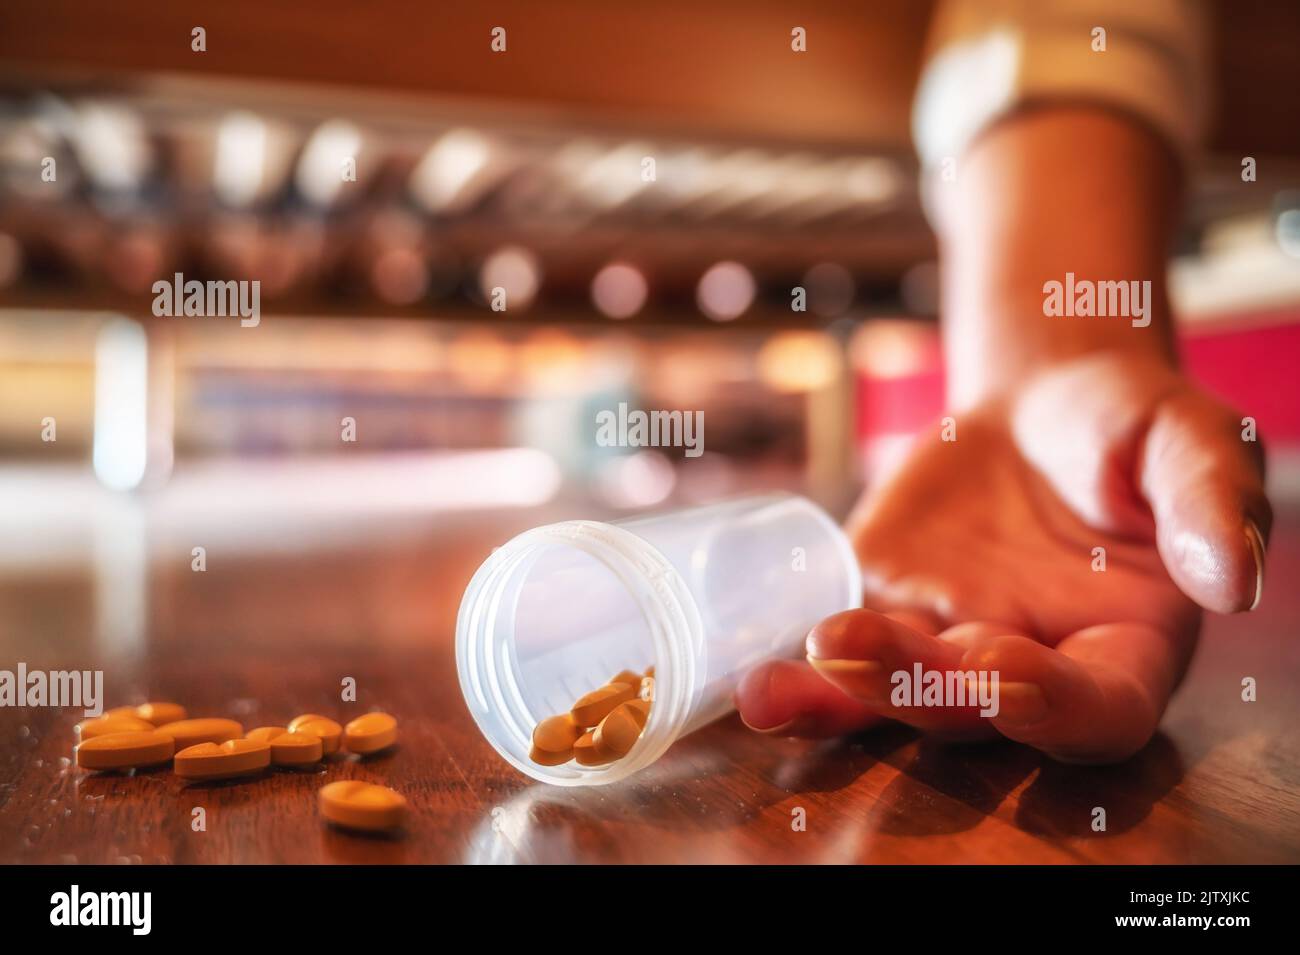 Dangerous abuse of sleeping pills with dropped tablets and a lifeless hand Stock Photo